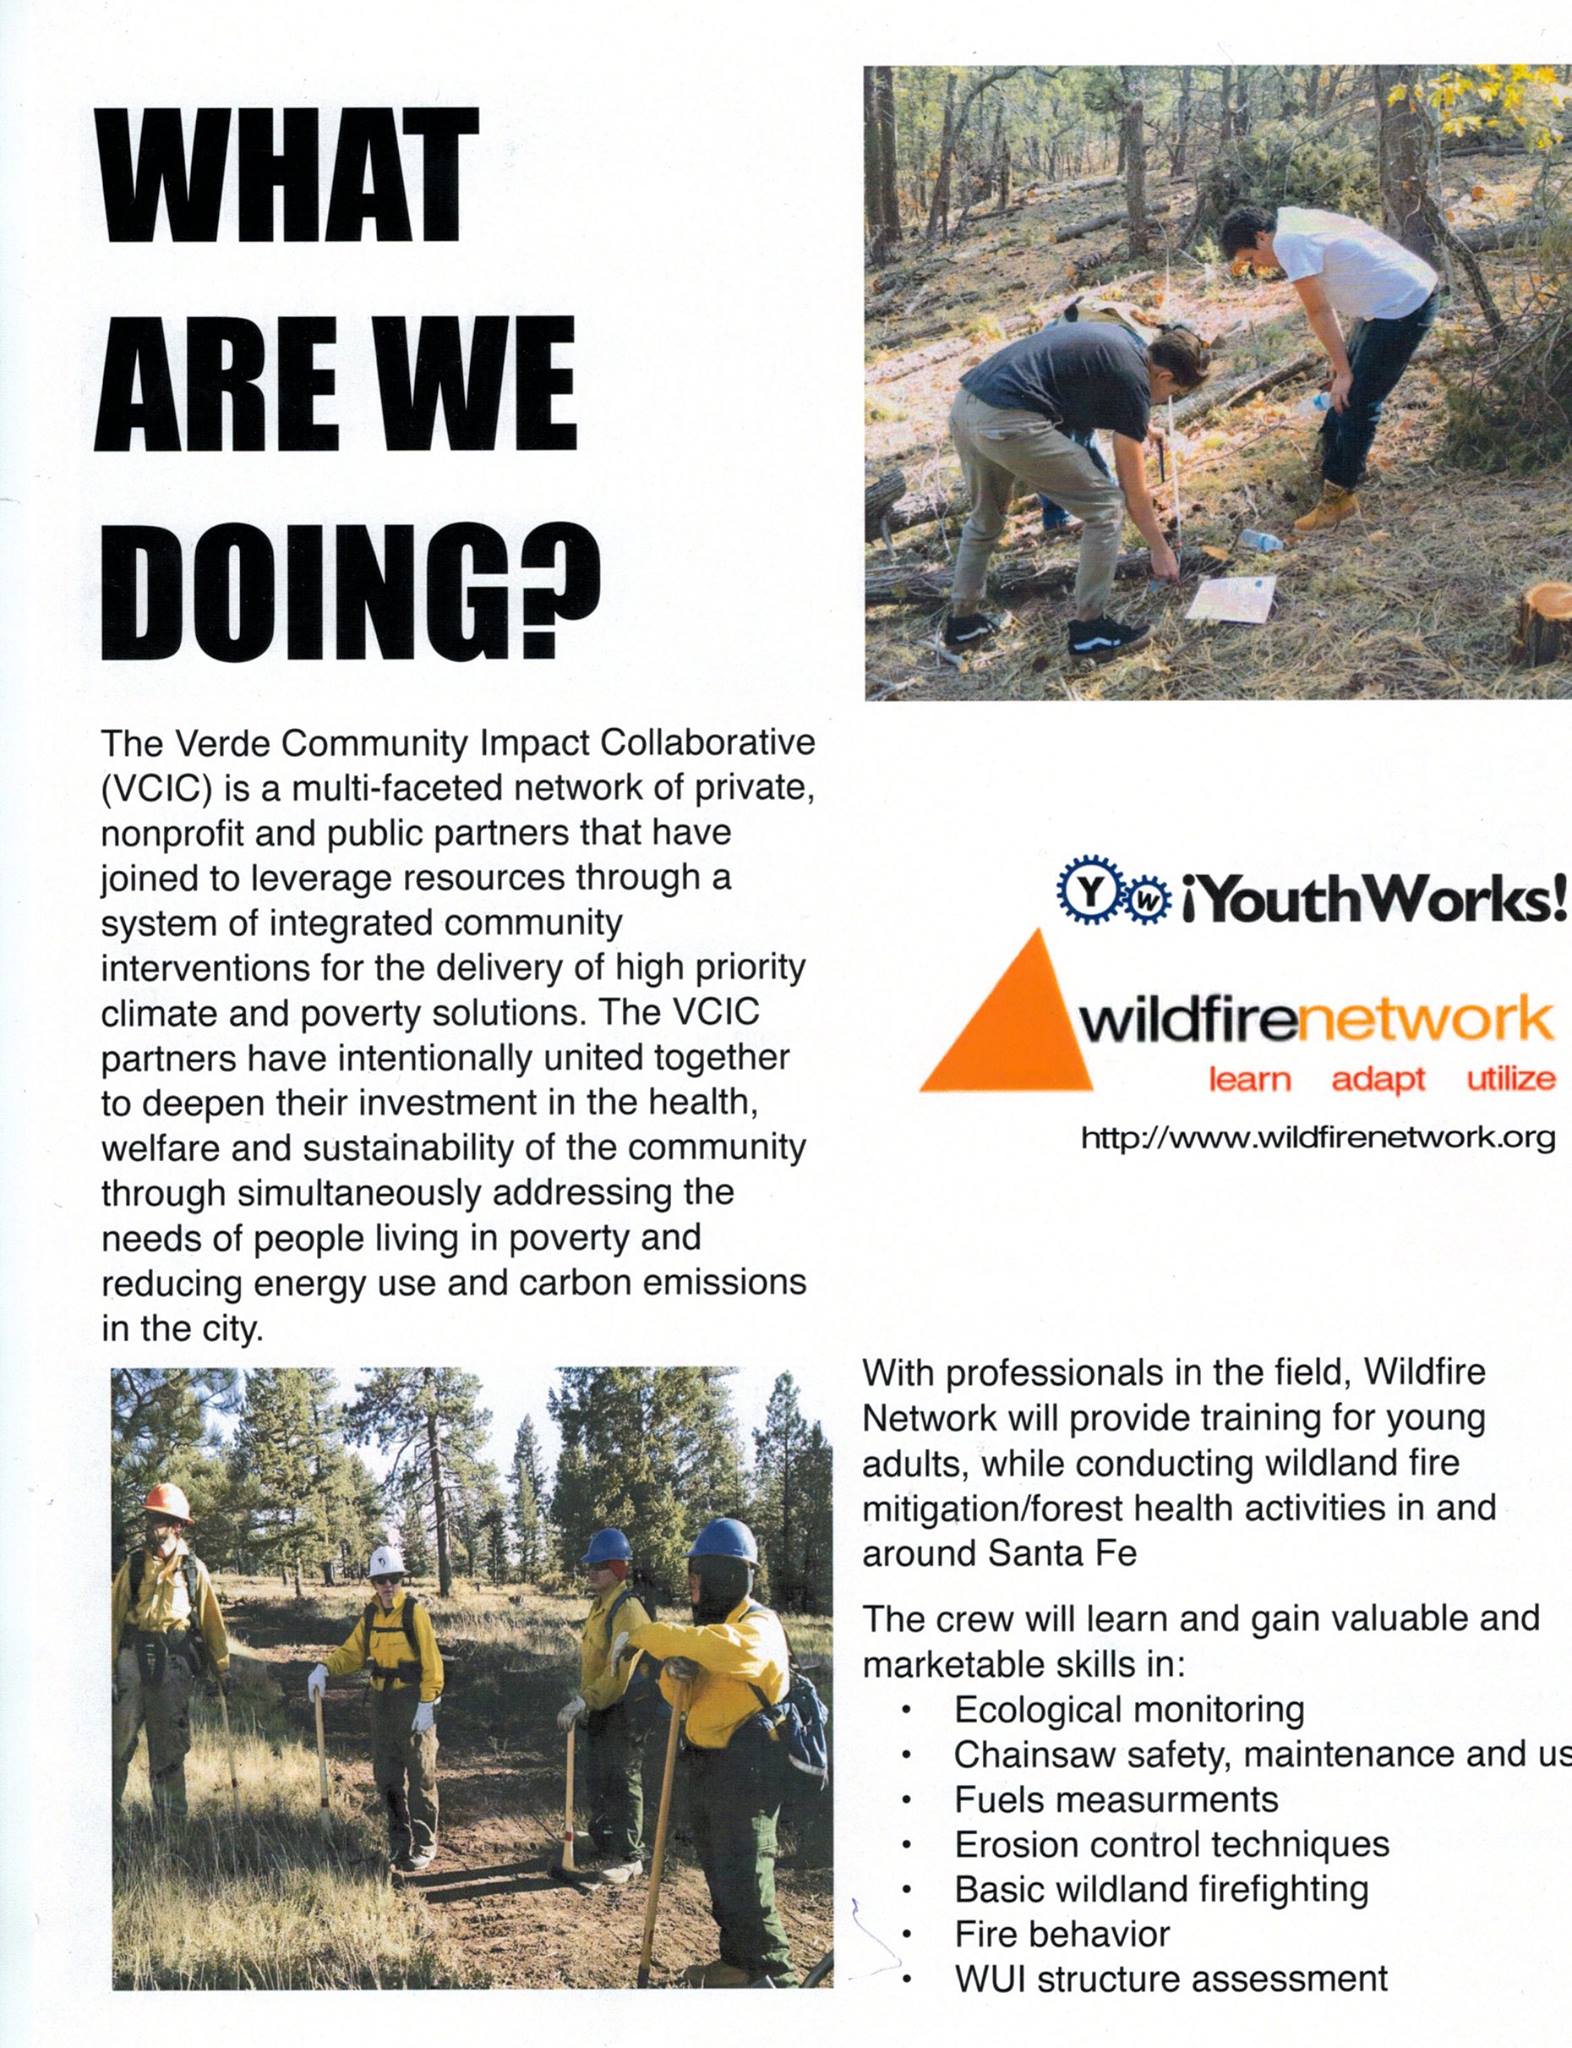 Wildfire network provides training for young adults as part of the Verde Community Impact Collaborative.